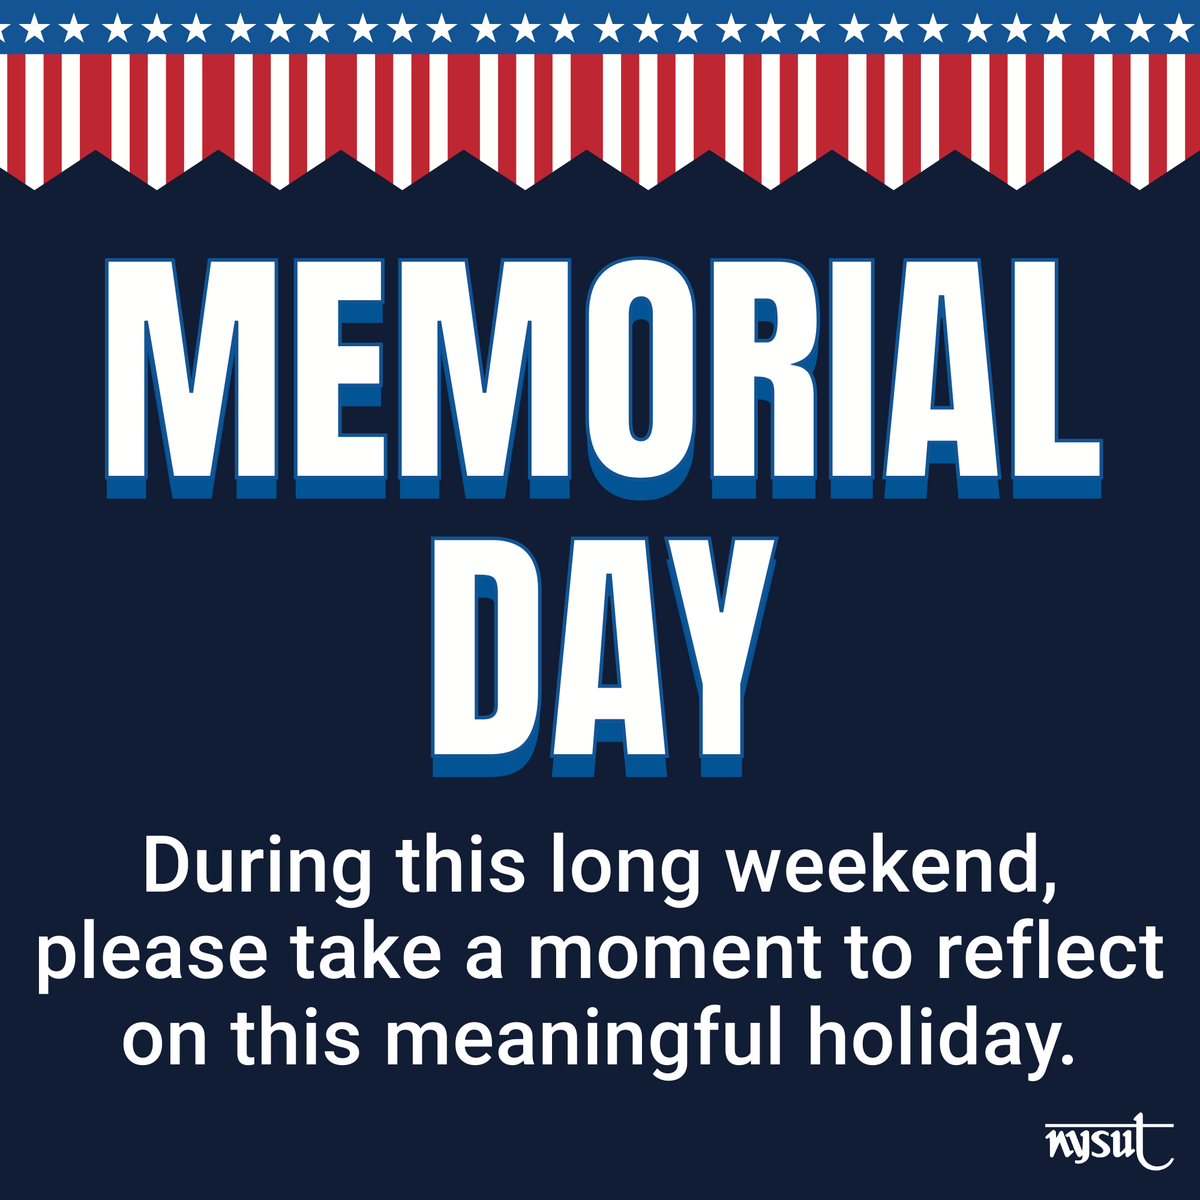 Today, we commemorate Memorial Day. We hope you and your loved ones can give thought to this important holiday.